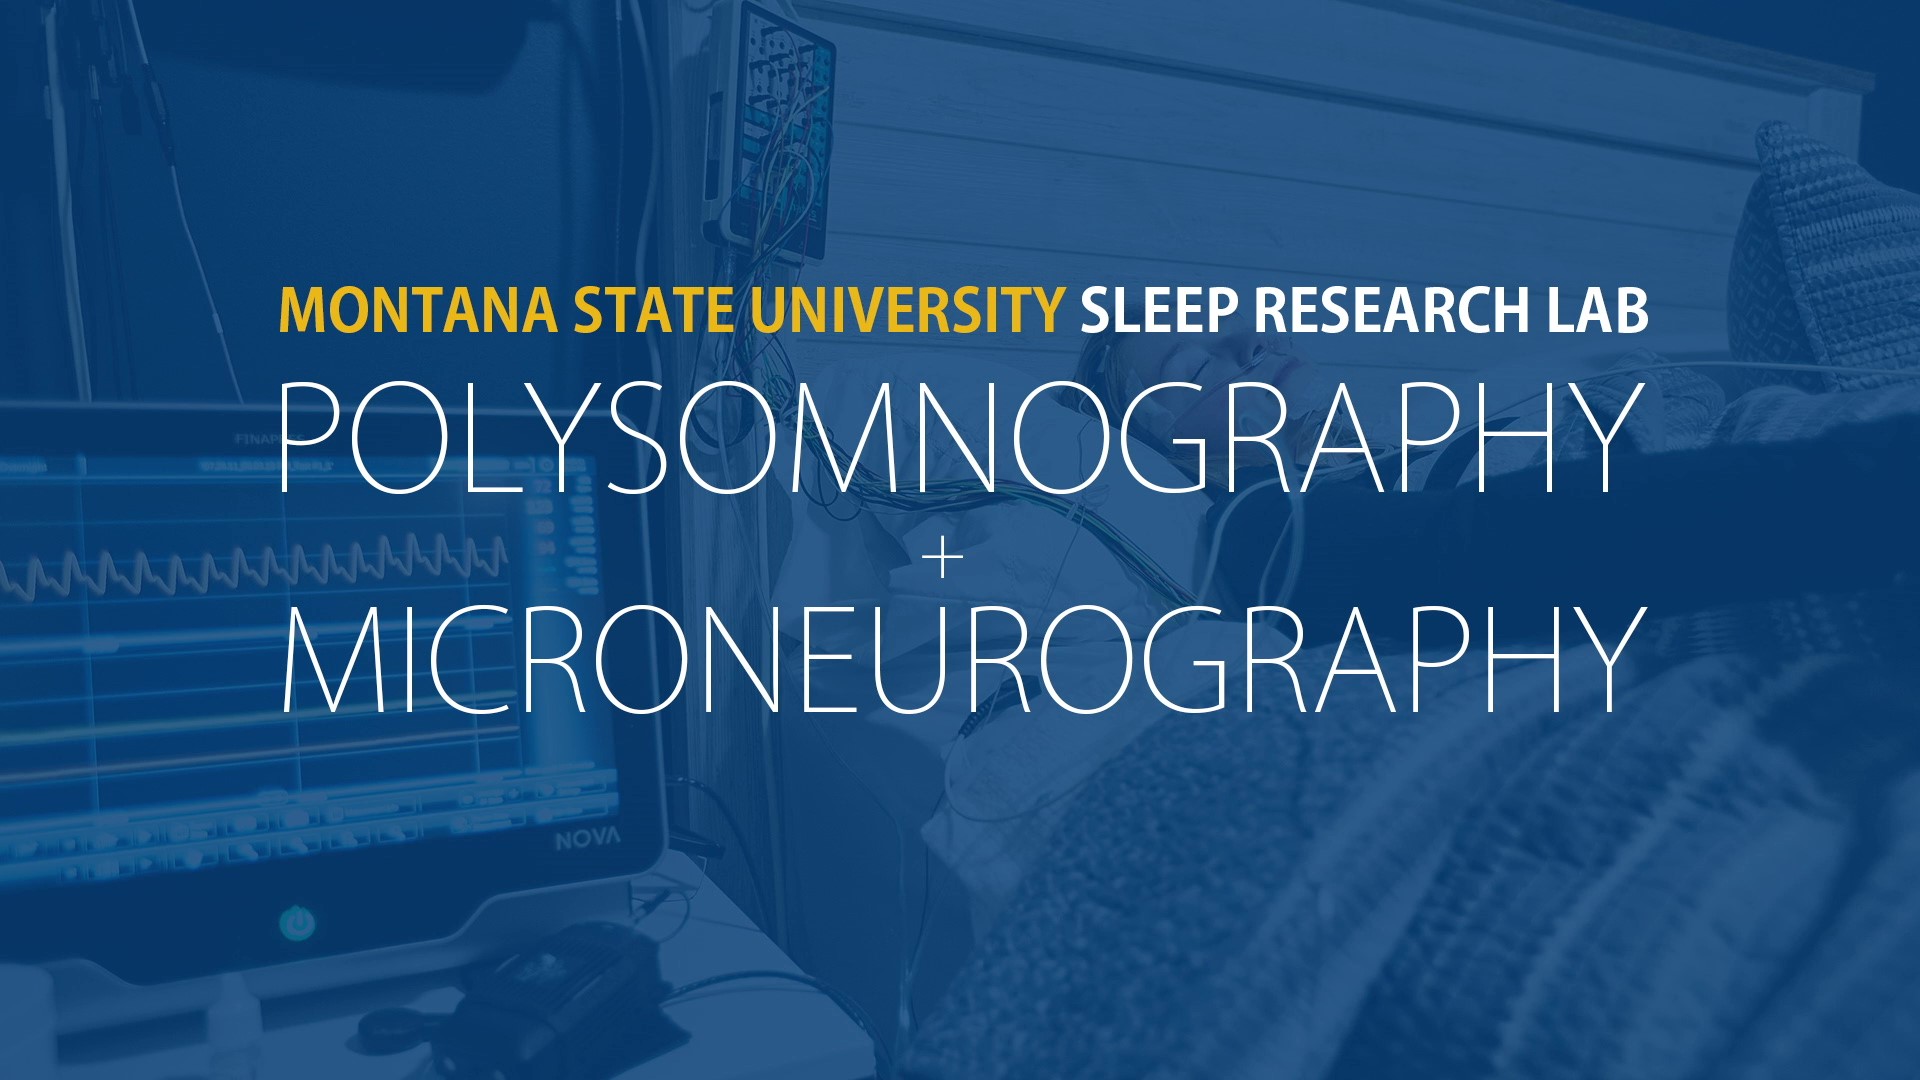 Sleep Research Lab Overview & Microneurography